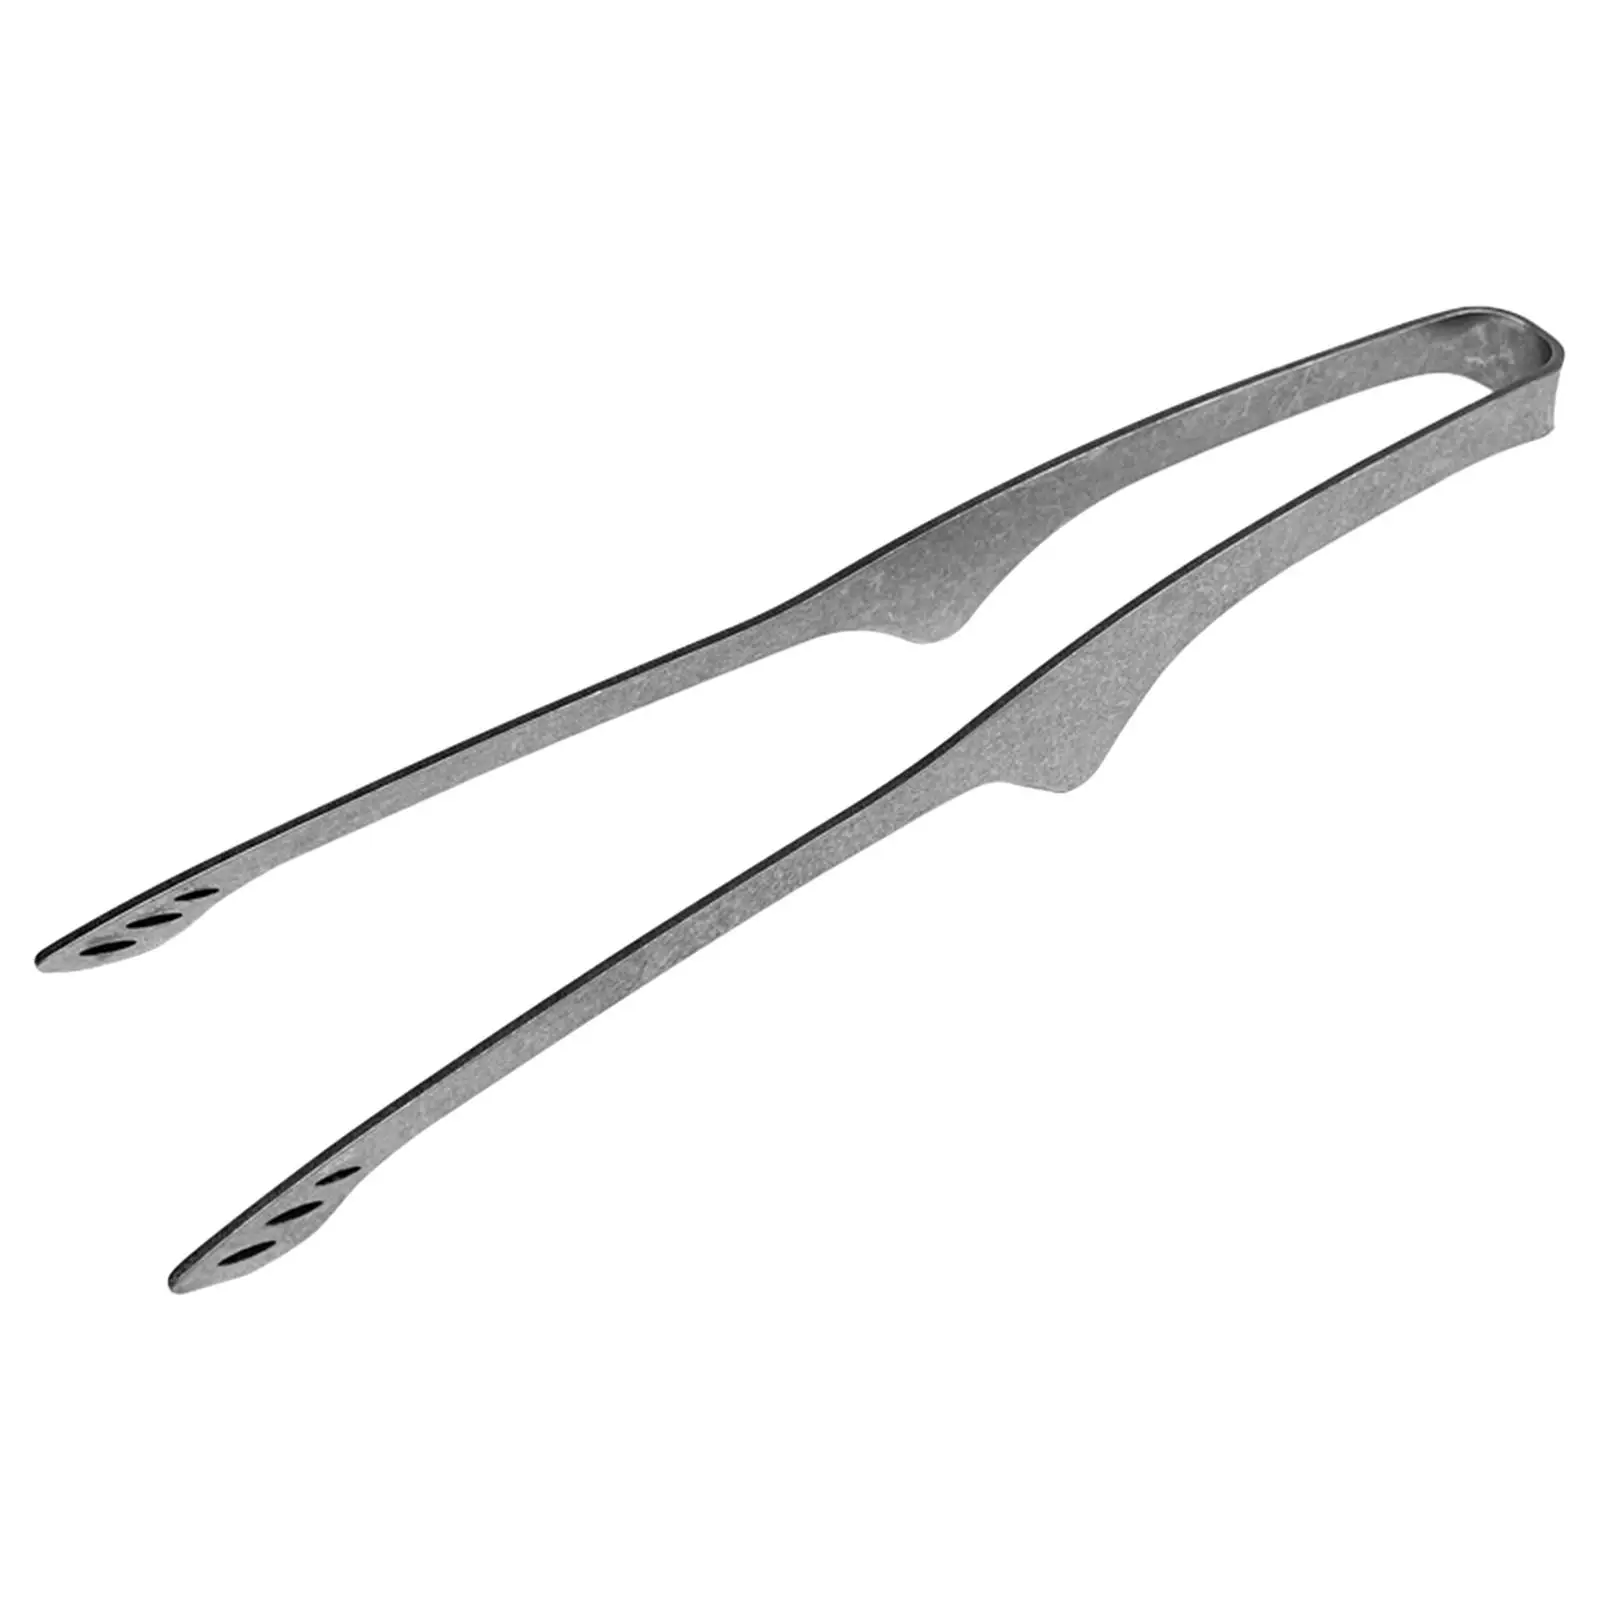 Titanium Grill Tongs Lightweight Multipurpose Durable Kitchen Tongs for Food Parties Barbecue Cooking Grilling Backpacking